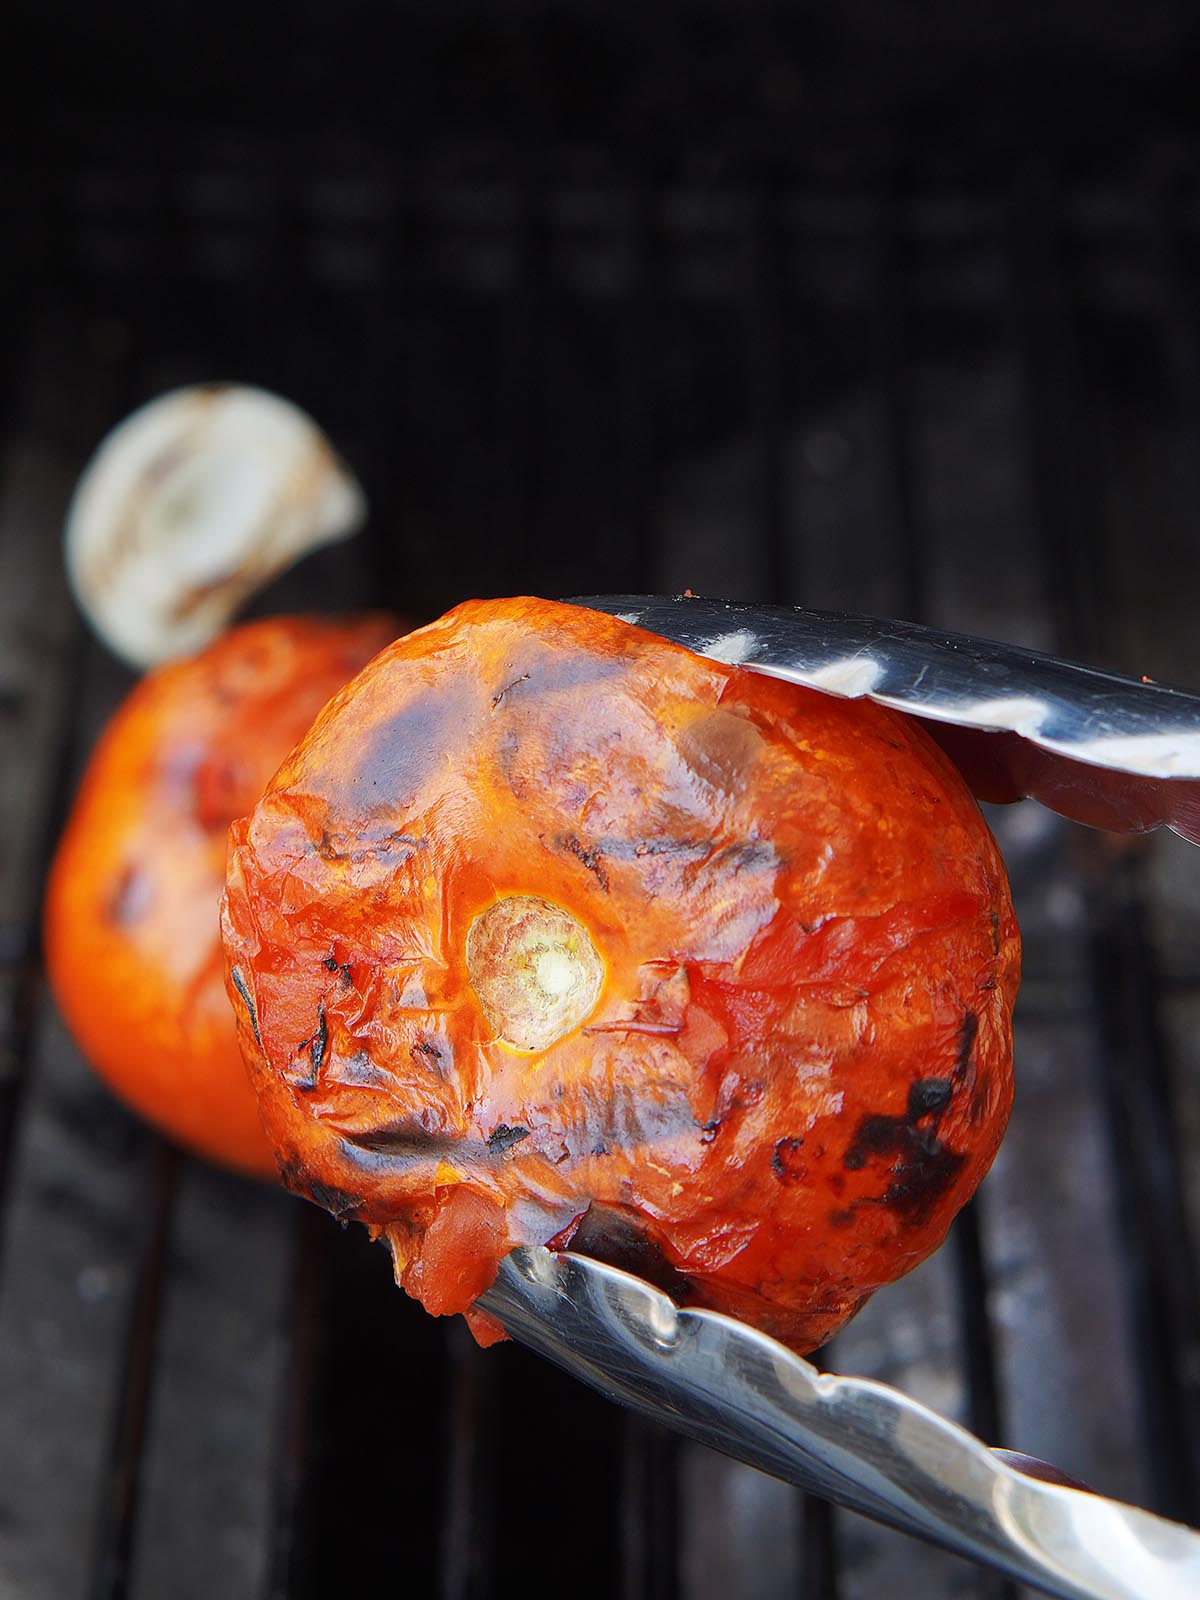 A roasted tomato grabbed by tong.